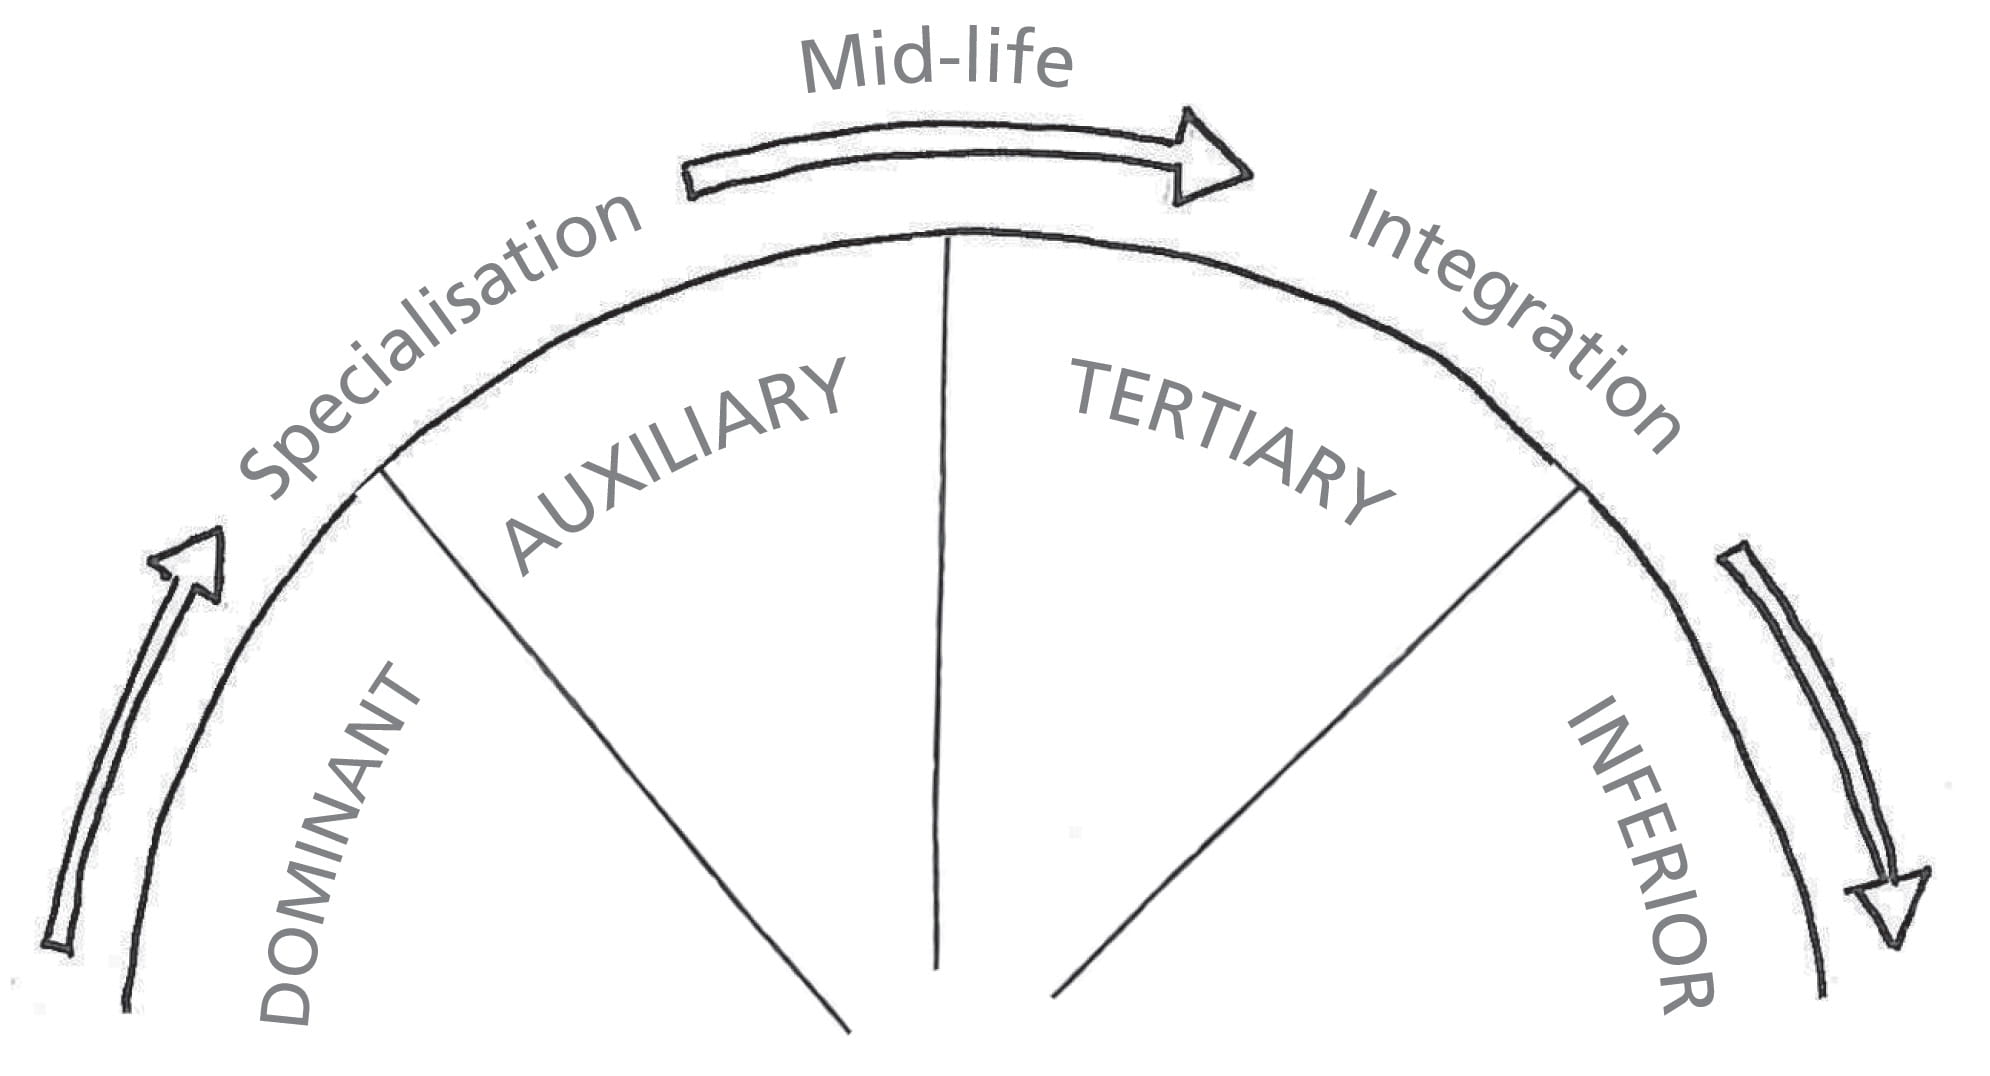 Jung's lifecycle from specialisation to midlife